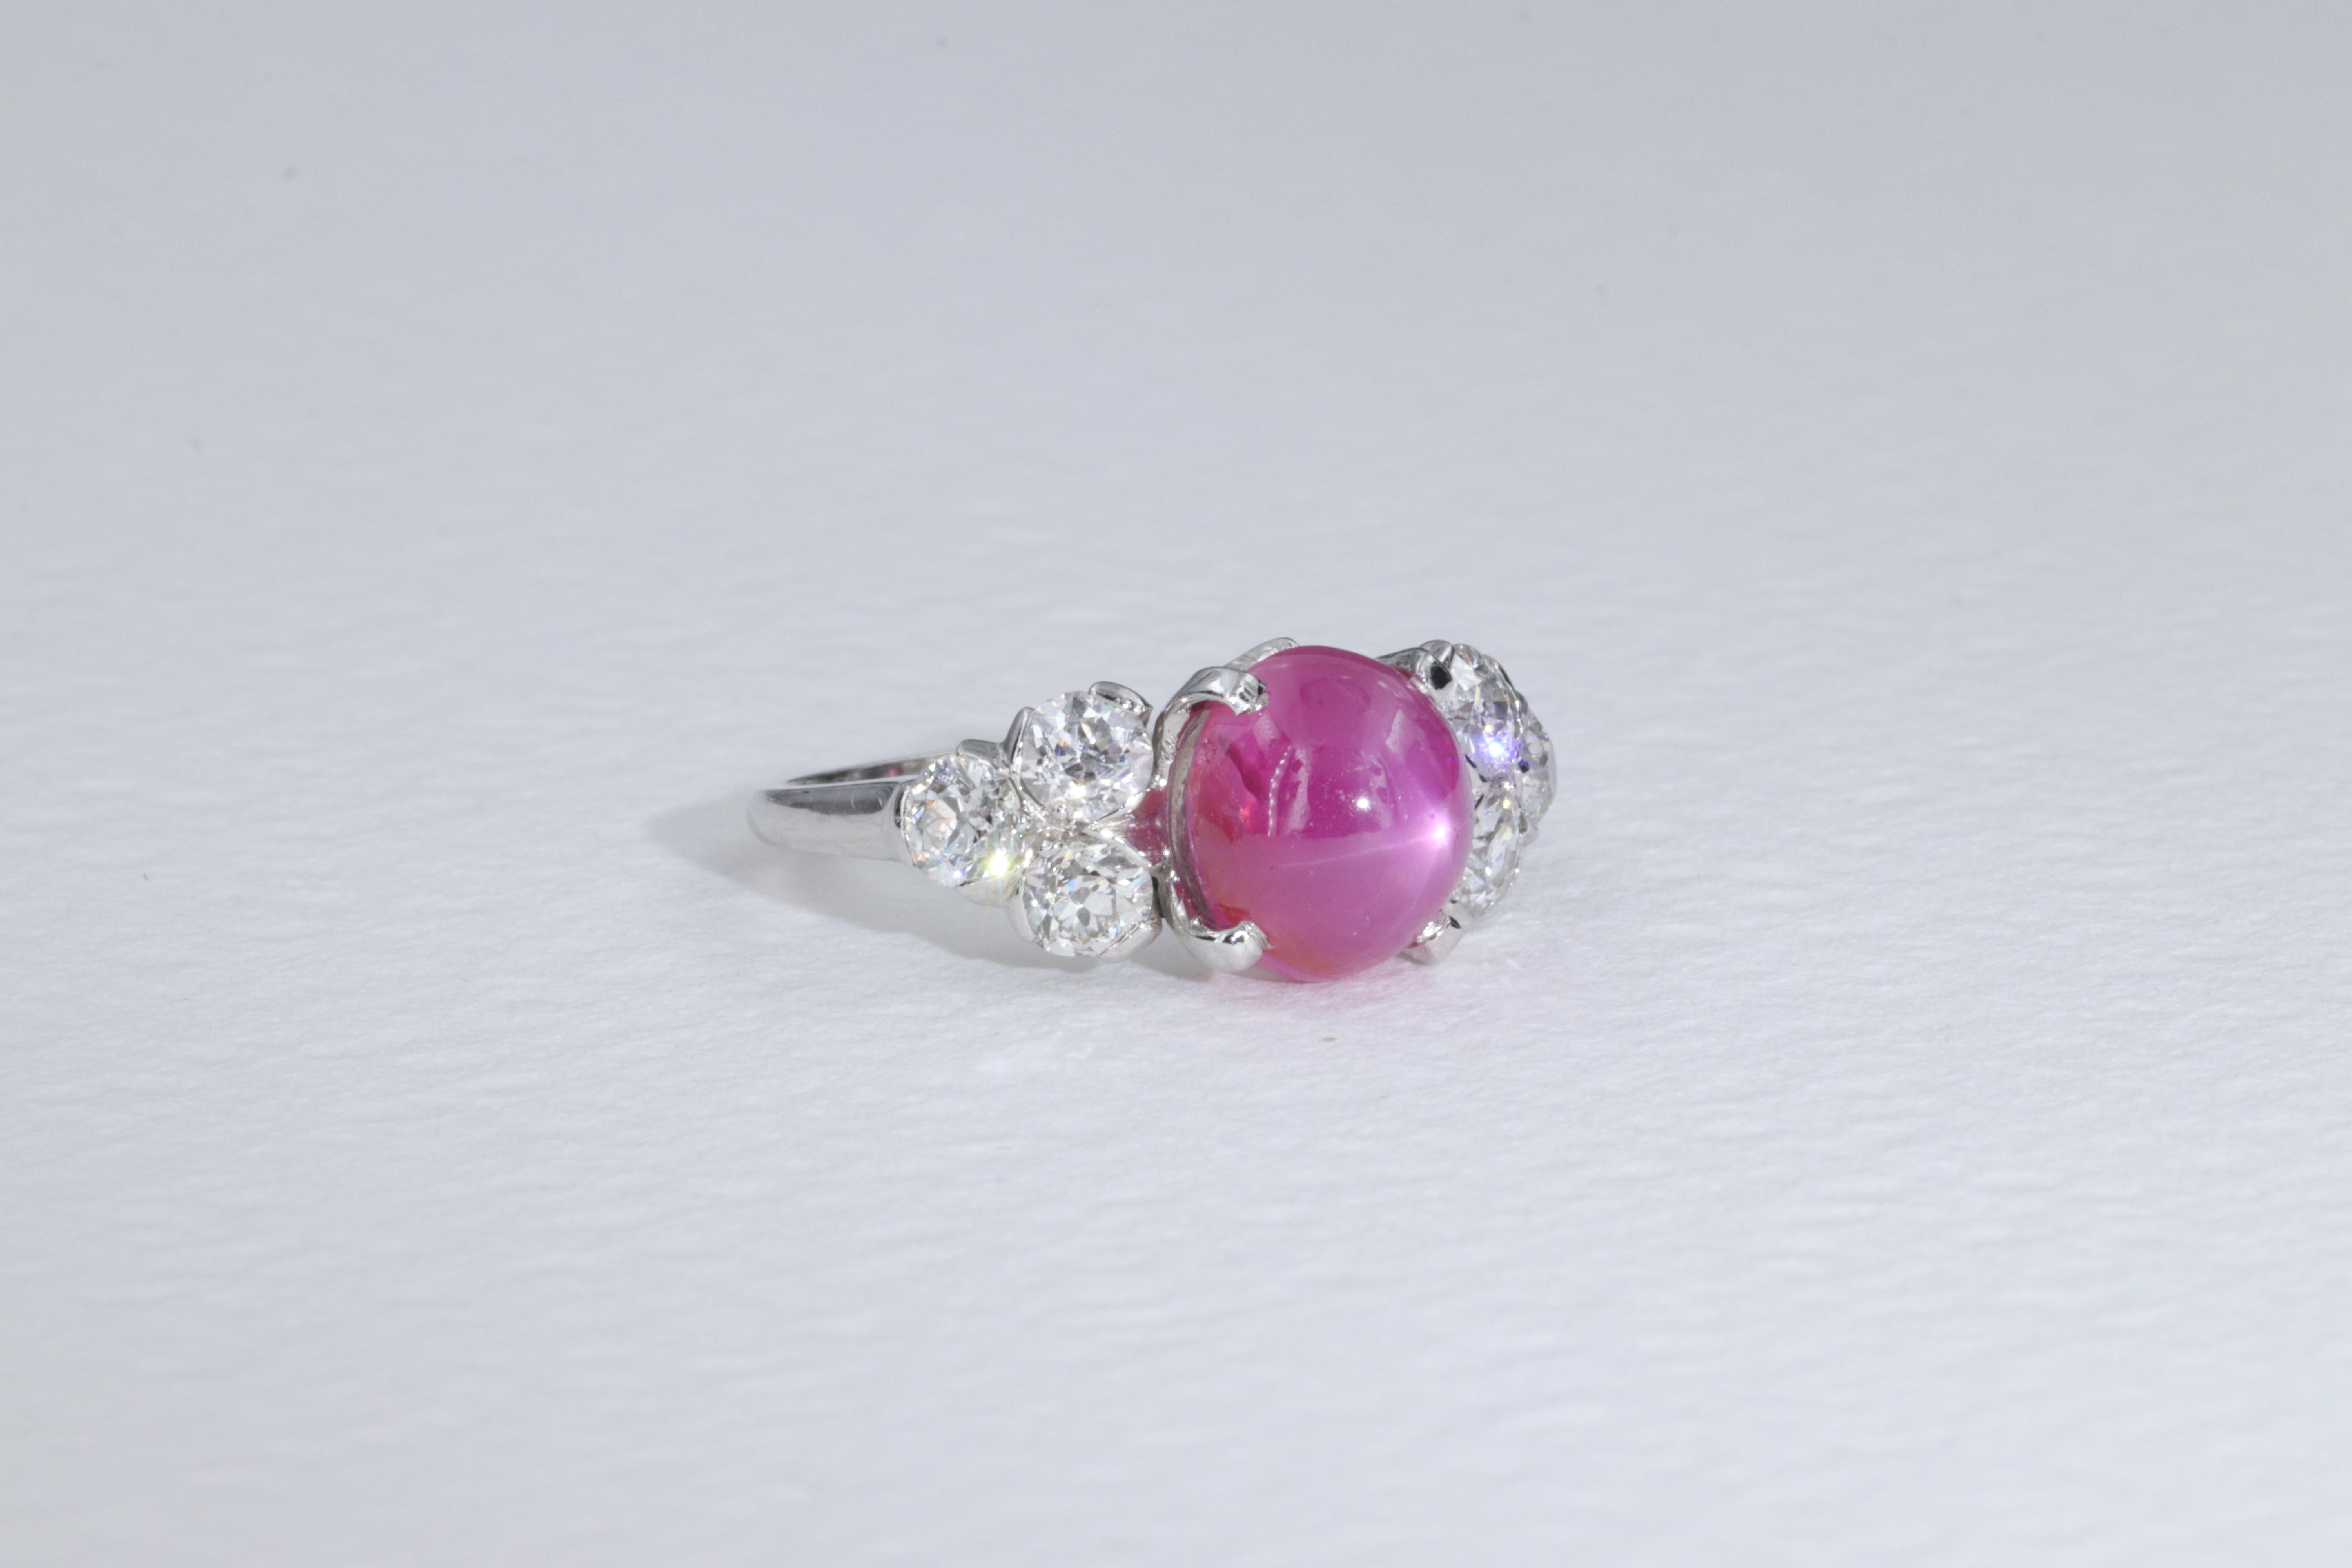 This beautiful Art Deco platinum ring circa 1920 is set with an exceptional no heat ~4.50 carat Pink Star Sapphire that exemplifies extraordinary color, clarity and quality of asterism (star effect). Stones of this caliber coupled with a Burmese